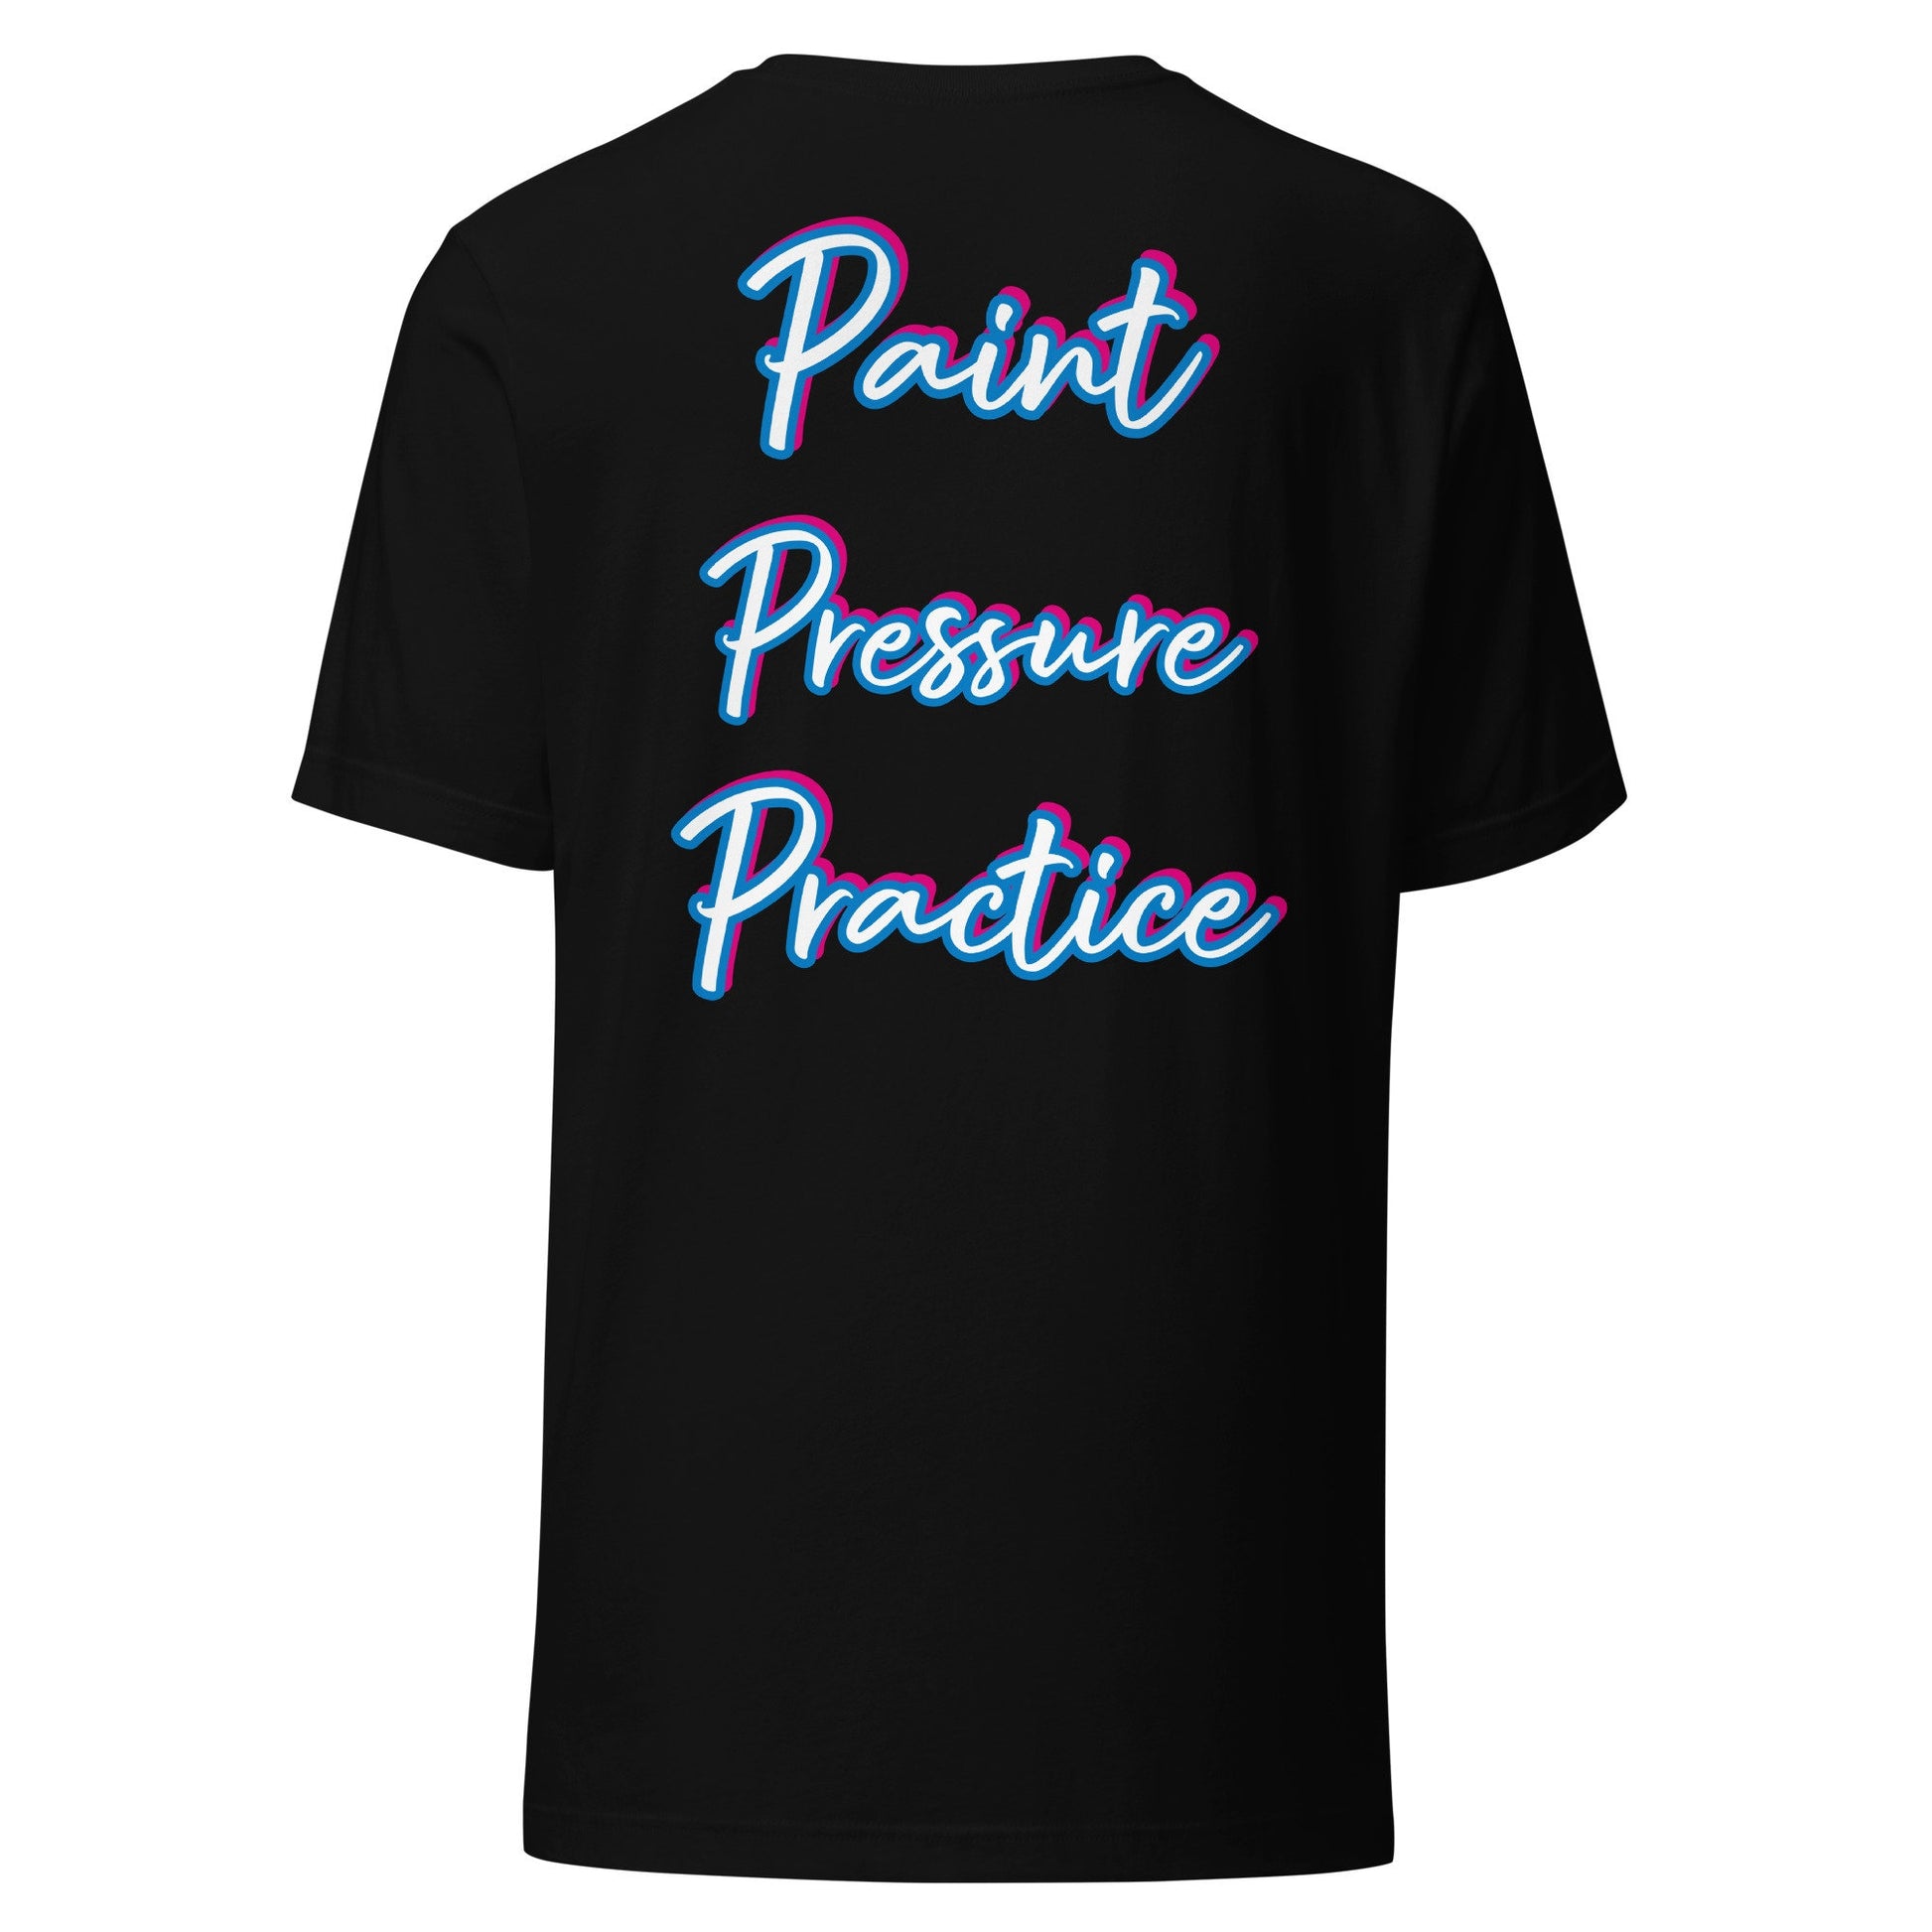 Clothing - T Shirt - Paint Pressure Practice (back) by PaintWithJosh